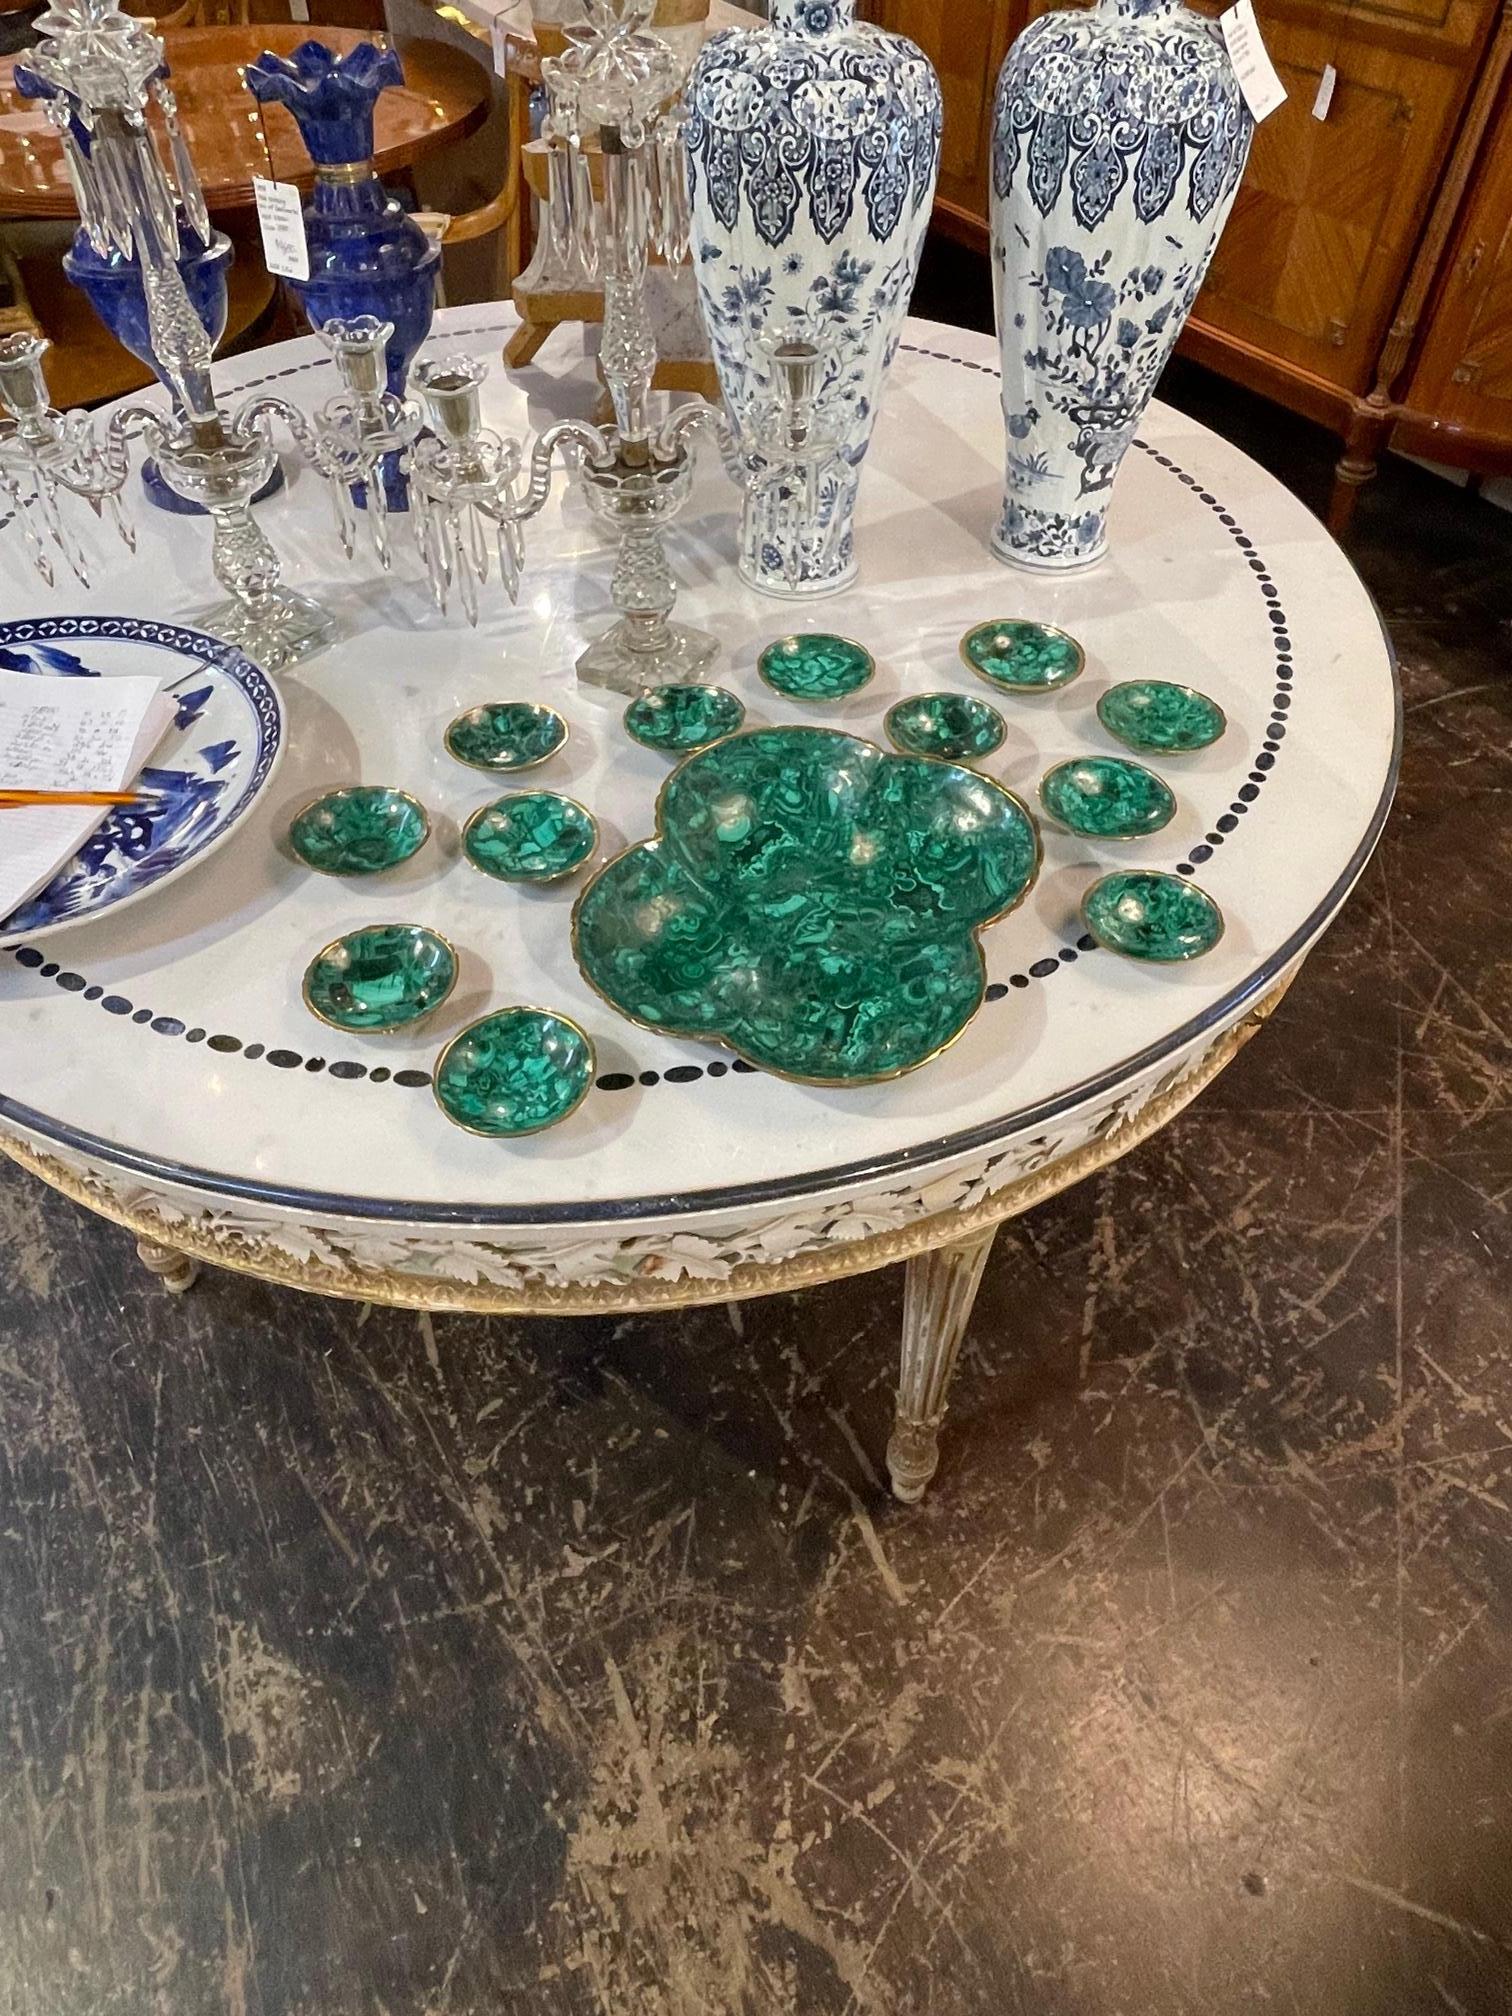 19th century Italian malachite and brass 13 piece nut dish set, circa 1880. This is a beautiful and functional set of bowls. Sure to make a statement for any party.